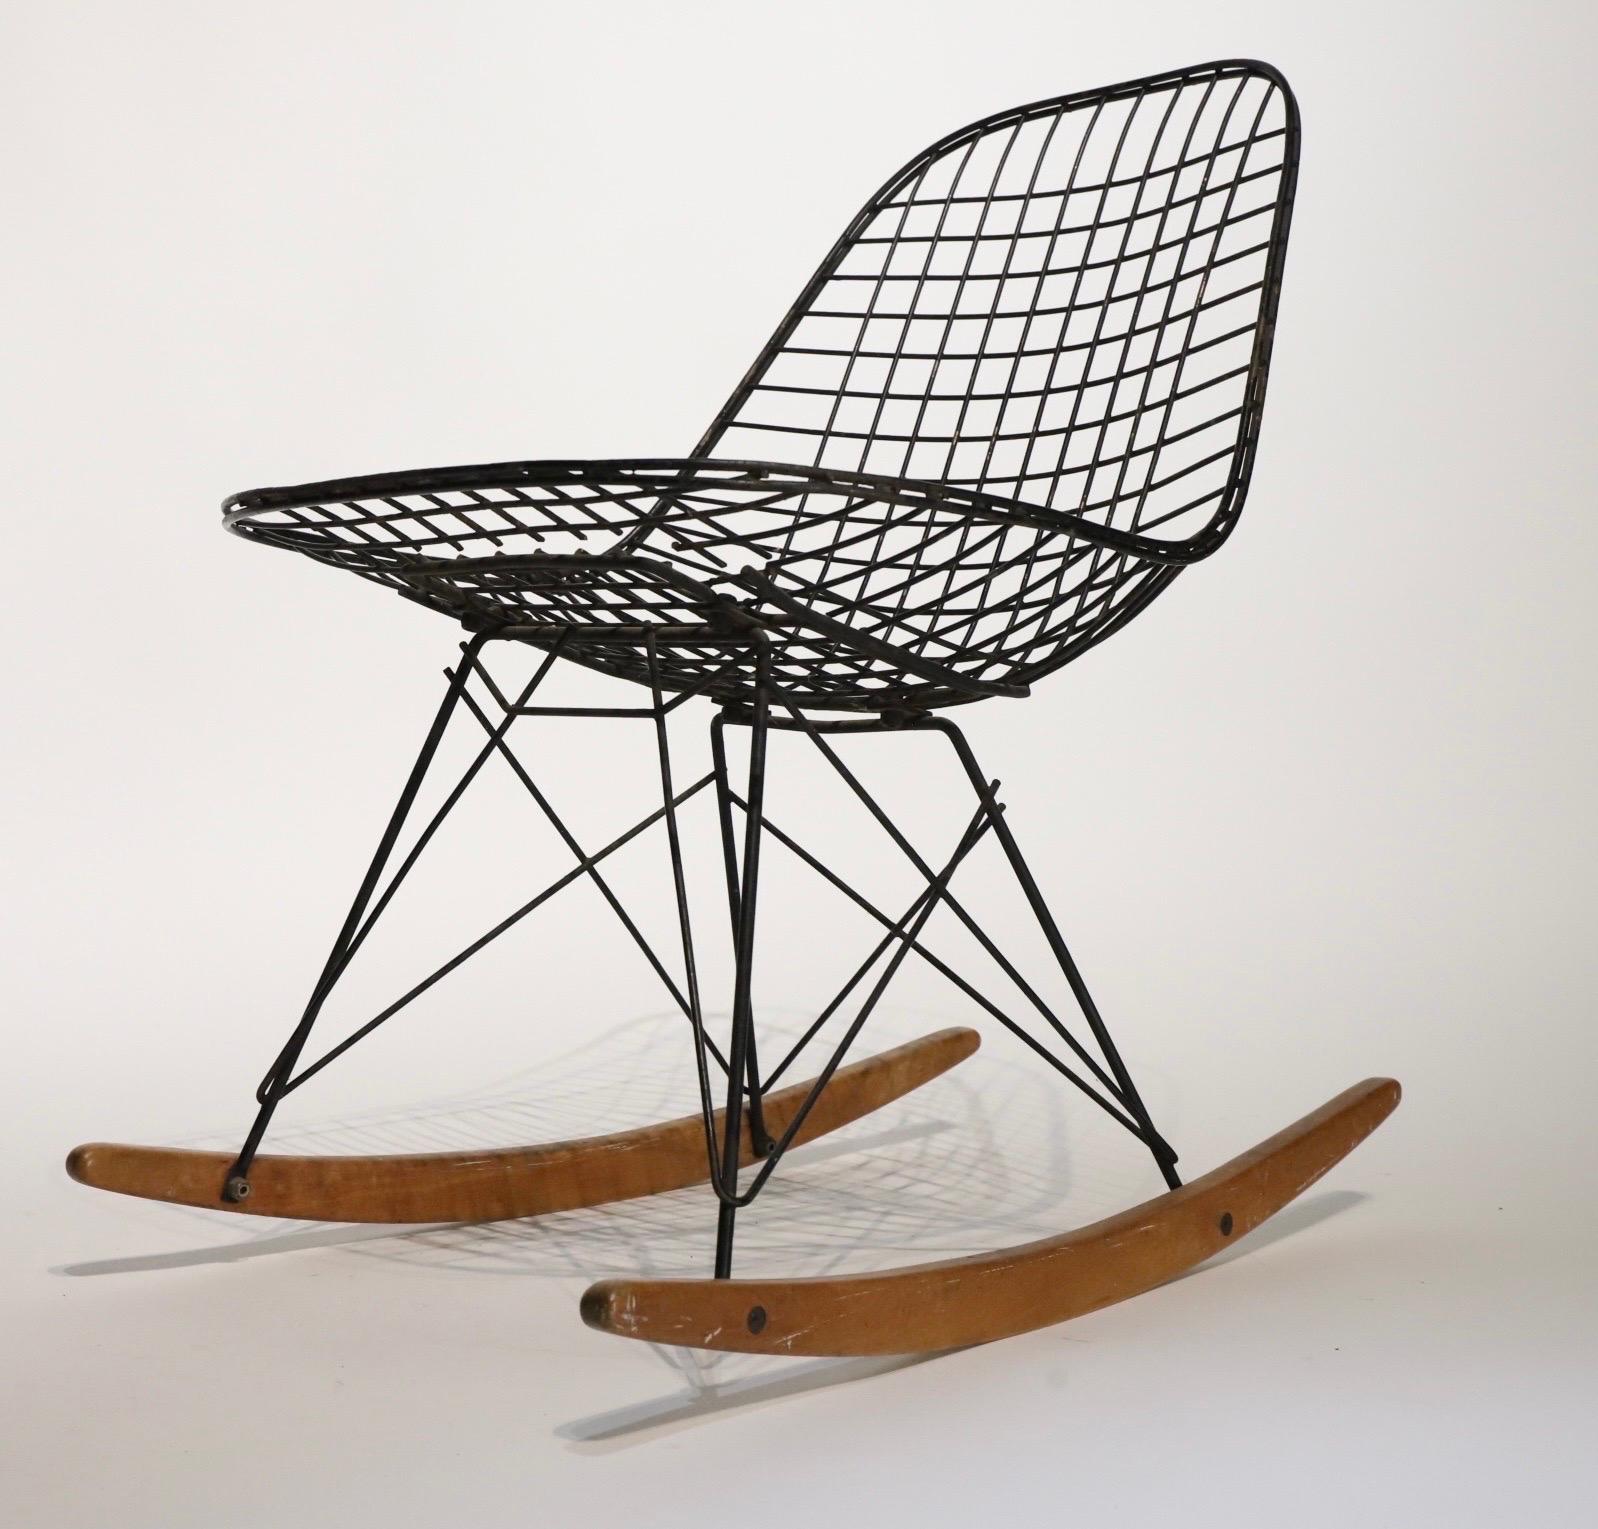 The iconic rocker or RKR by Charles and Ray Eames for Herman Miller. This example is being sold in original found condition with all its flaws and charactered patina. A wonderful addition to anyones Eames chair collection.